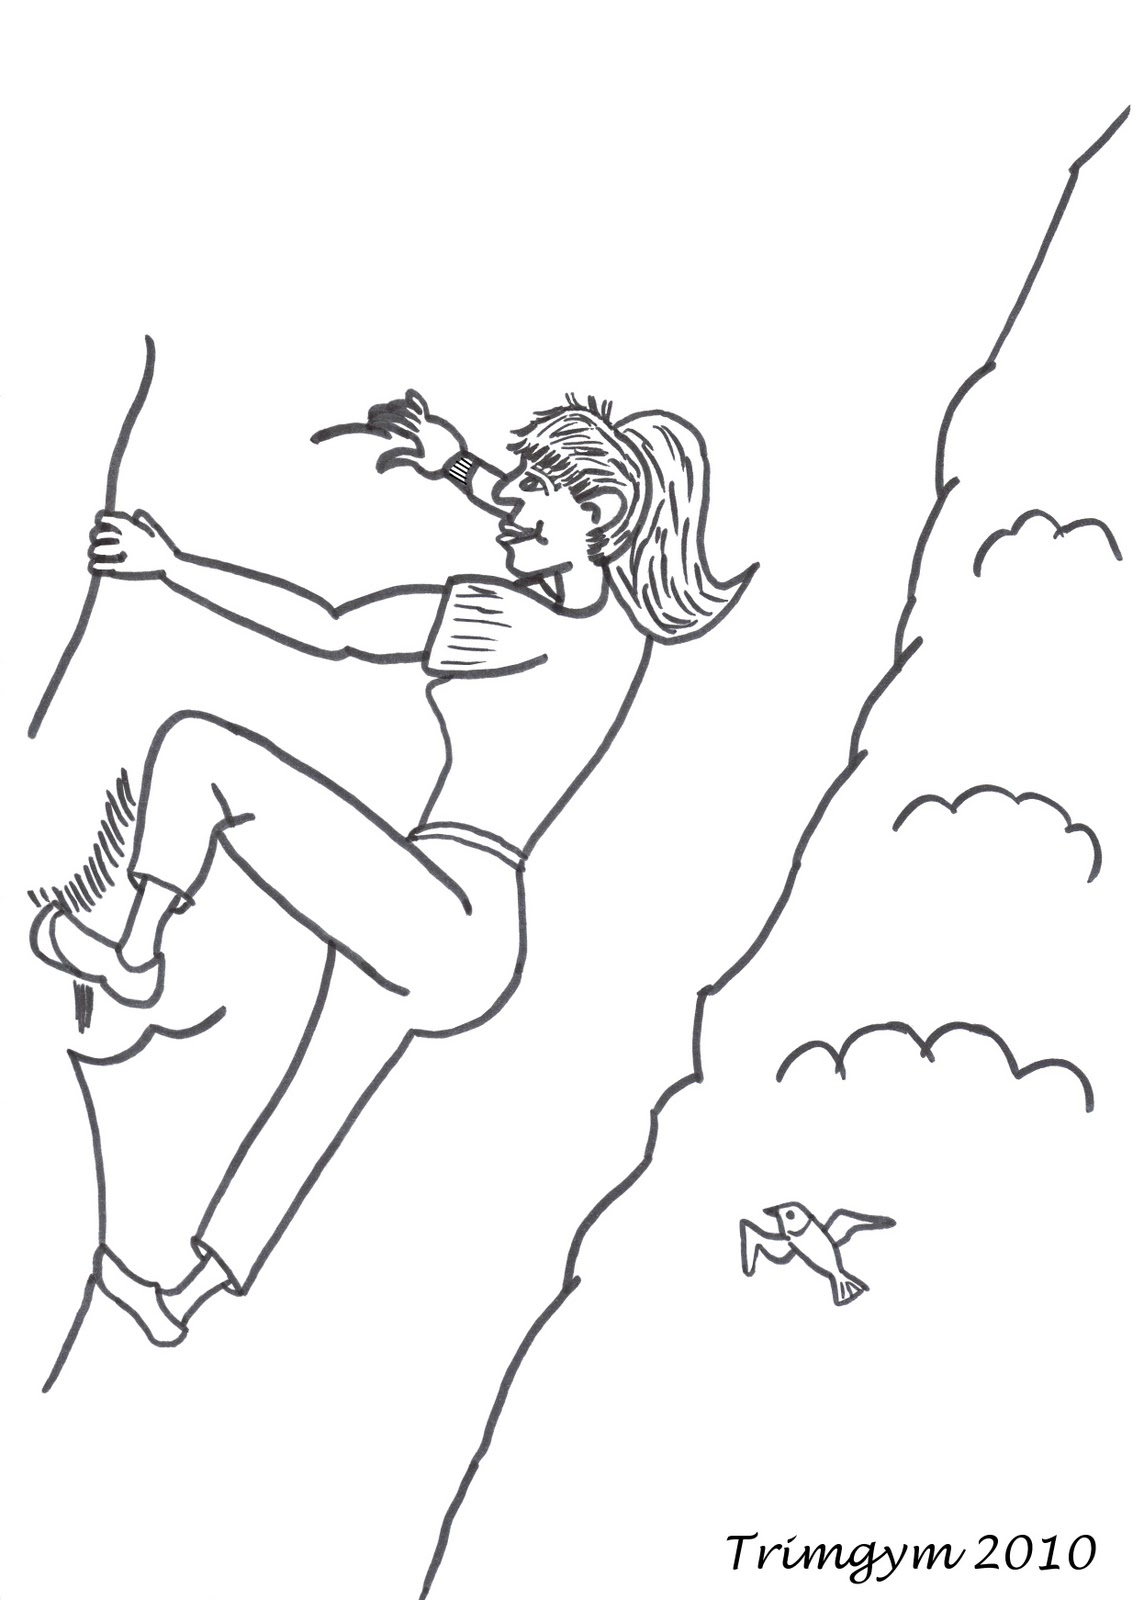 rock climbing coloring pages